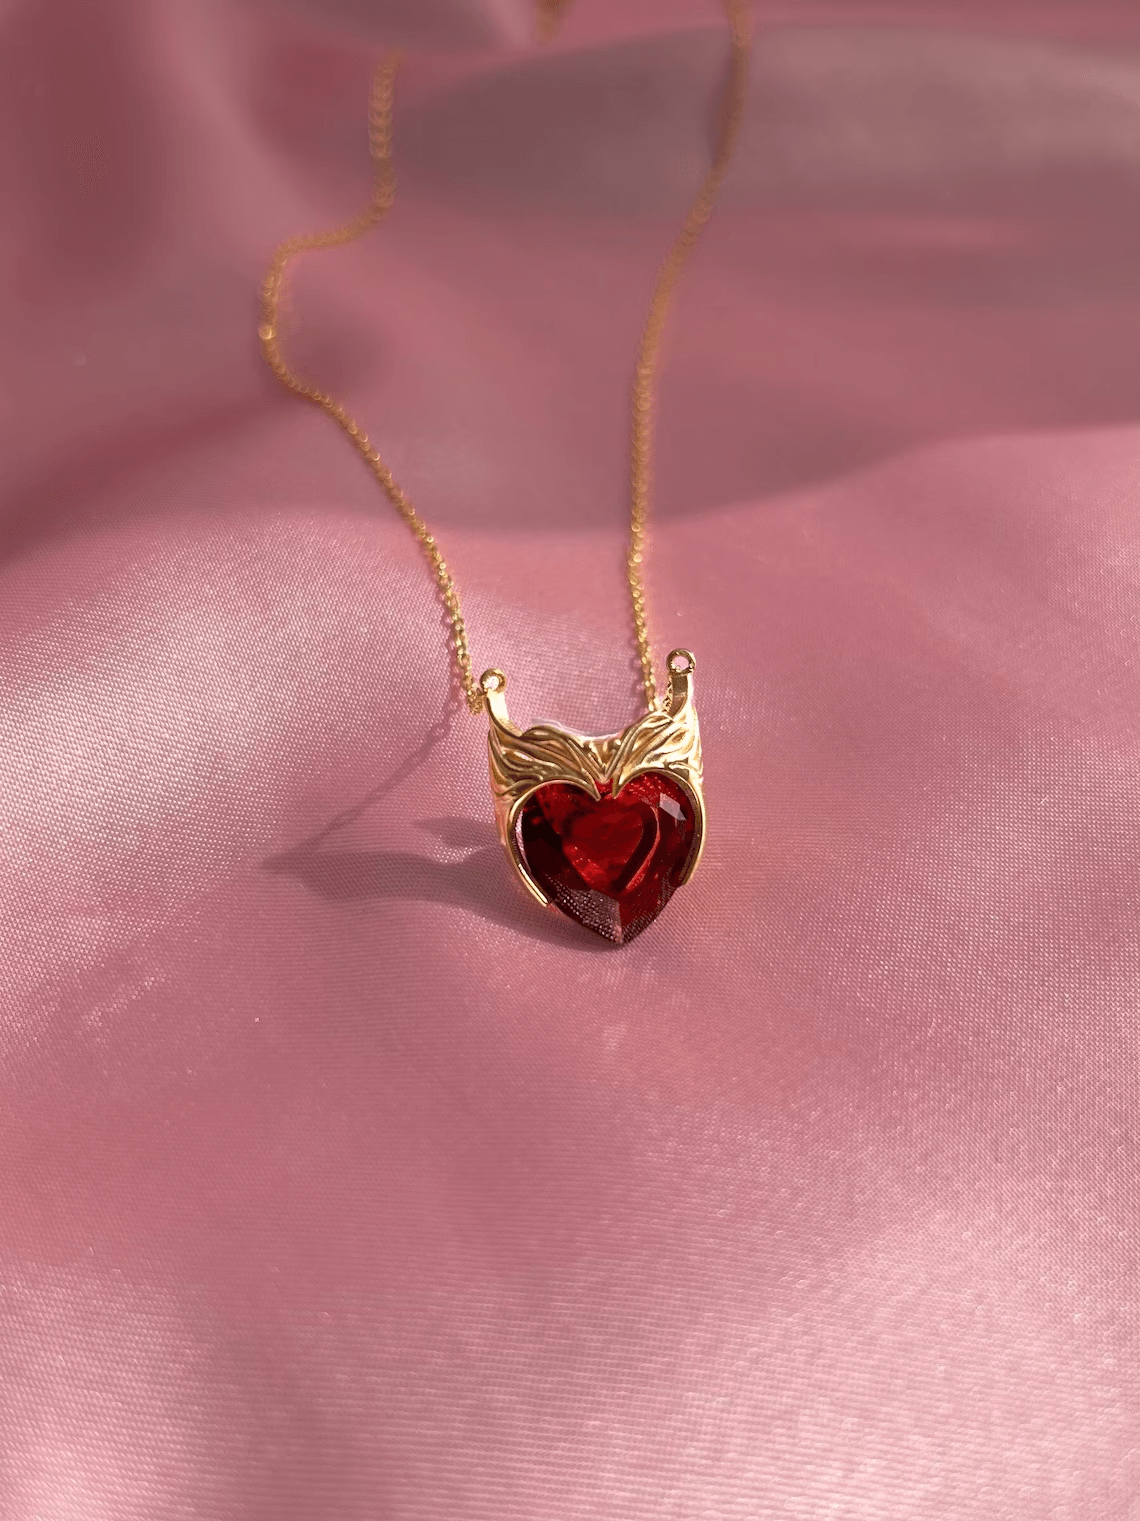 Scarlet Witch Crown Inspired Necklace